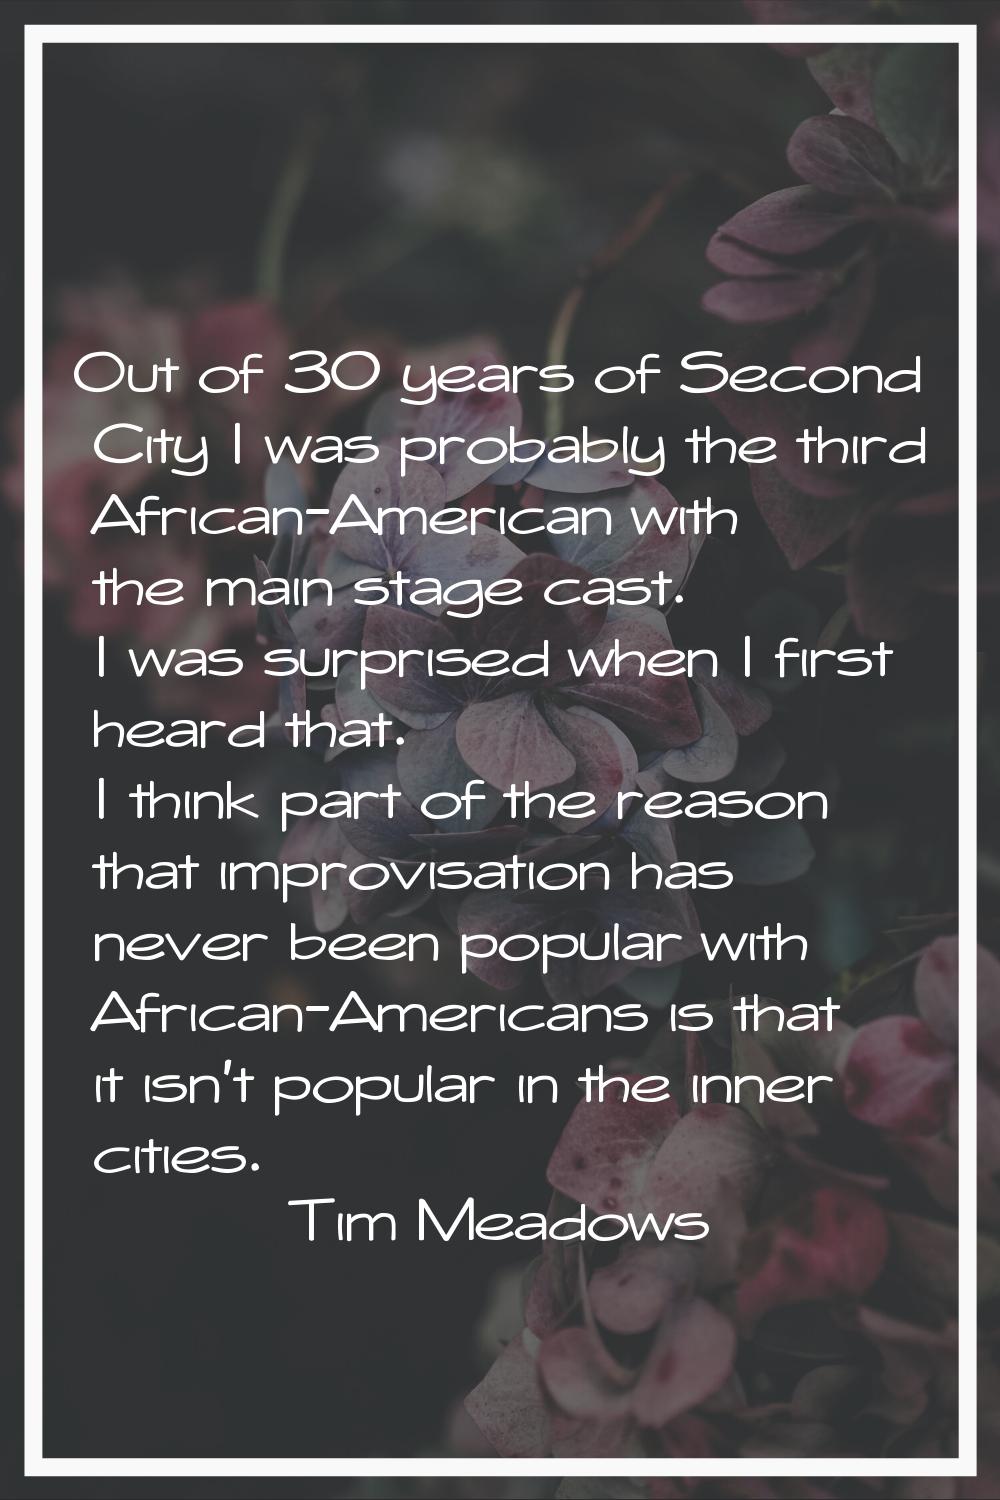 Out of 30 years of Second City I was probably the third African-American with the main stage cast. 